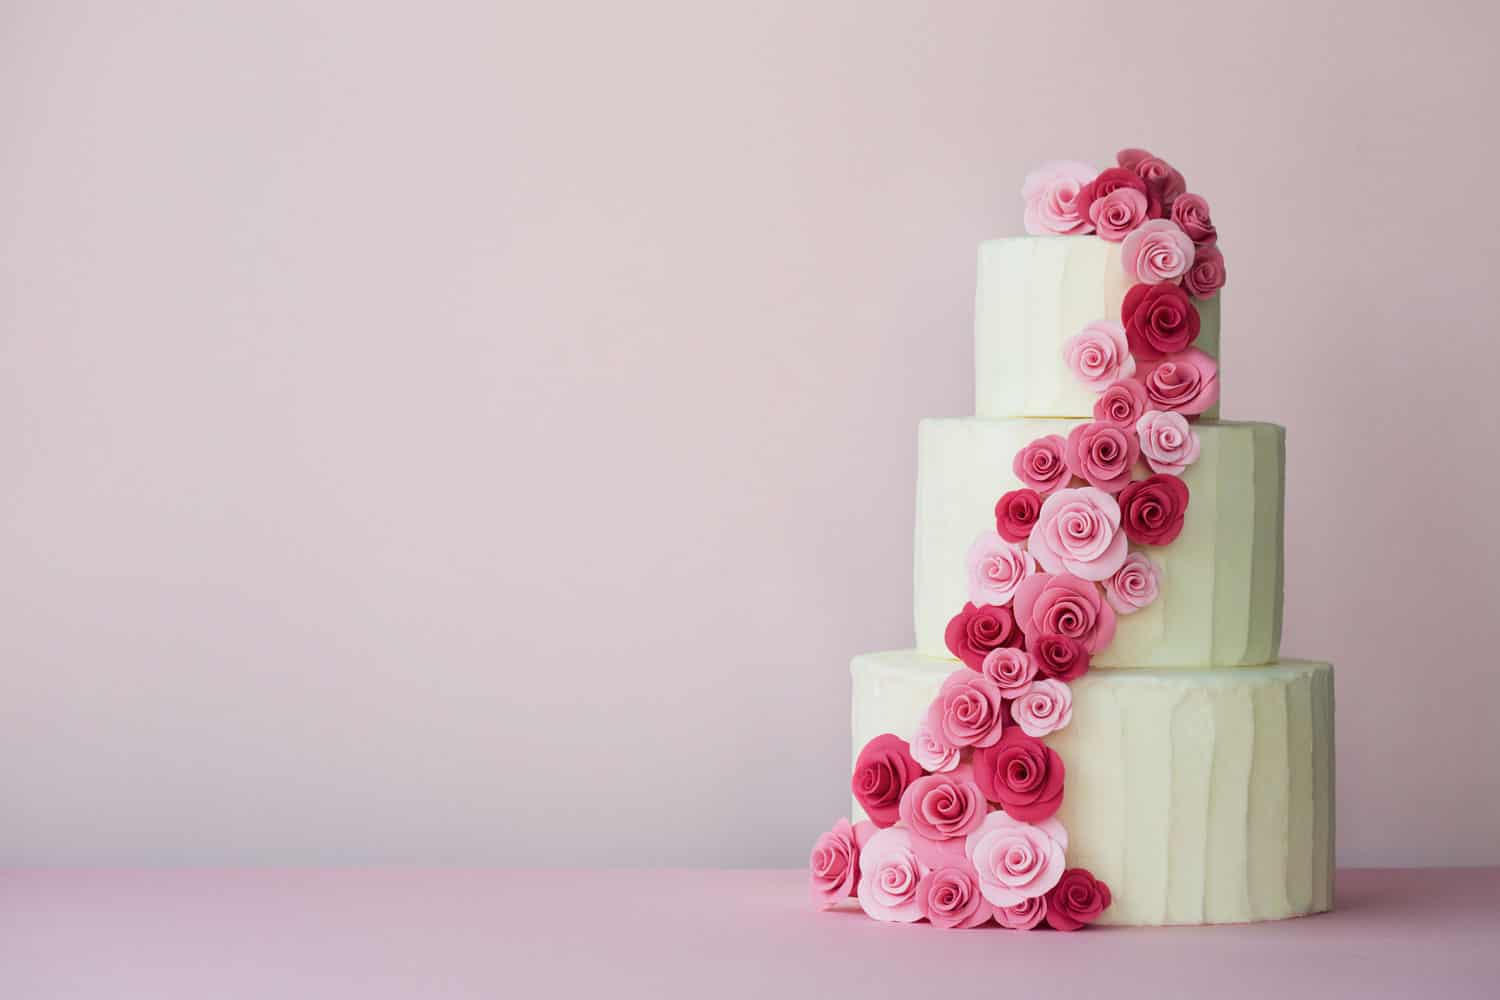 Tiered wedding cake with sugarpaste roses in pink